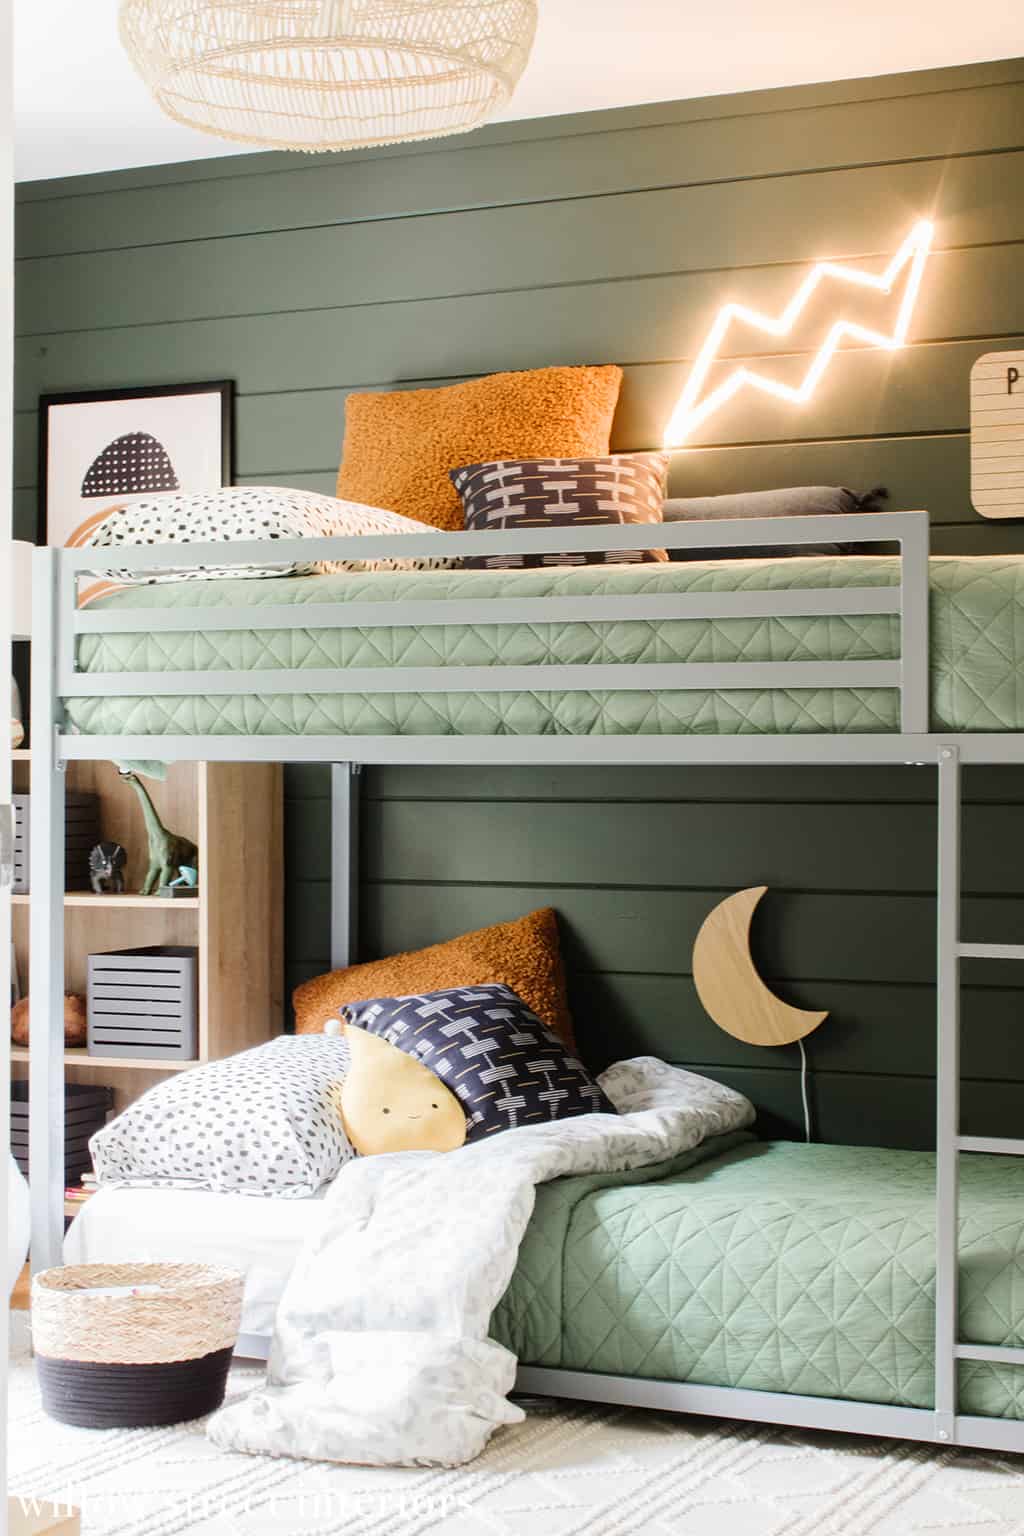 Little Boys Bedroom Ideas by Willow Street Interiors